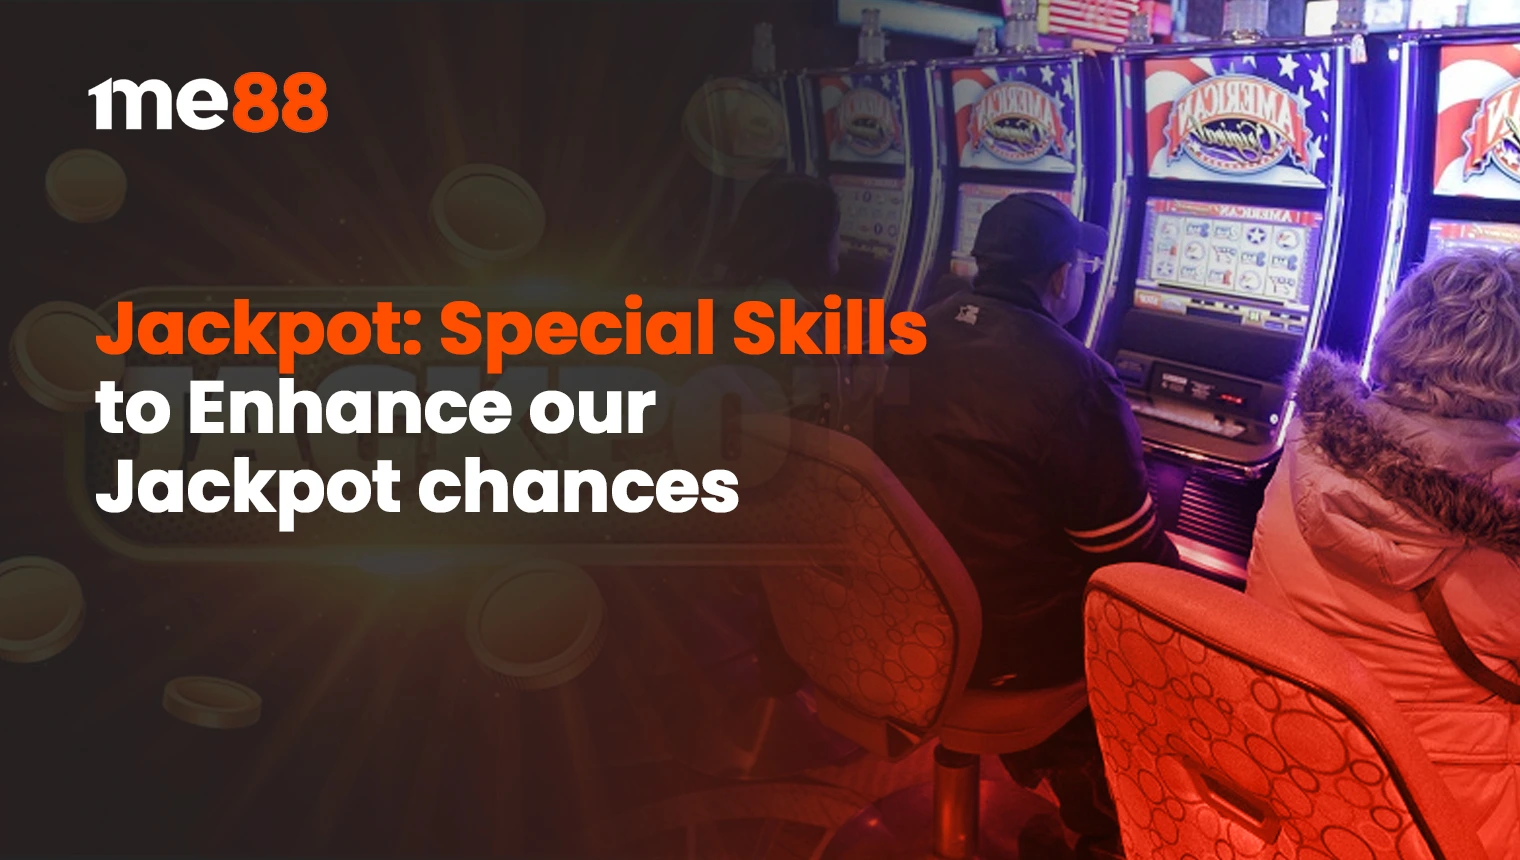 Jackpot: Special Skills to Enhance our Jackpot chances